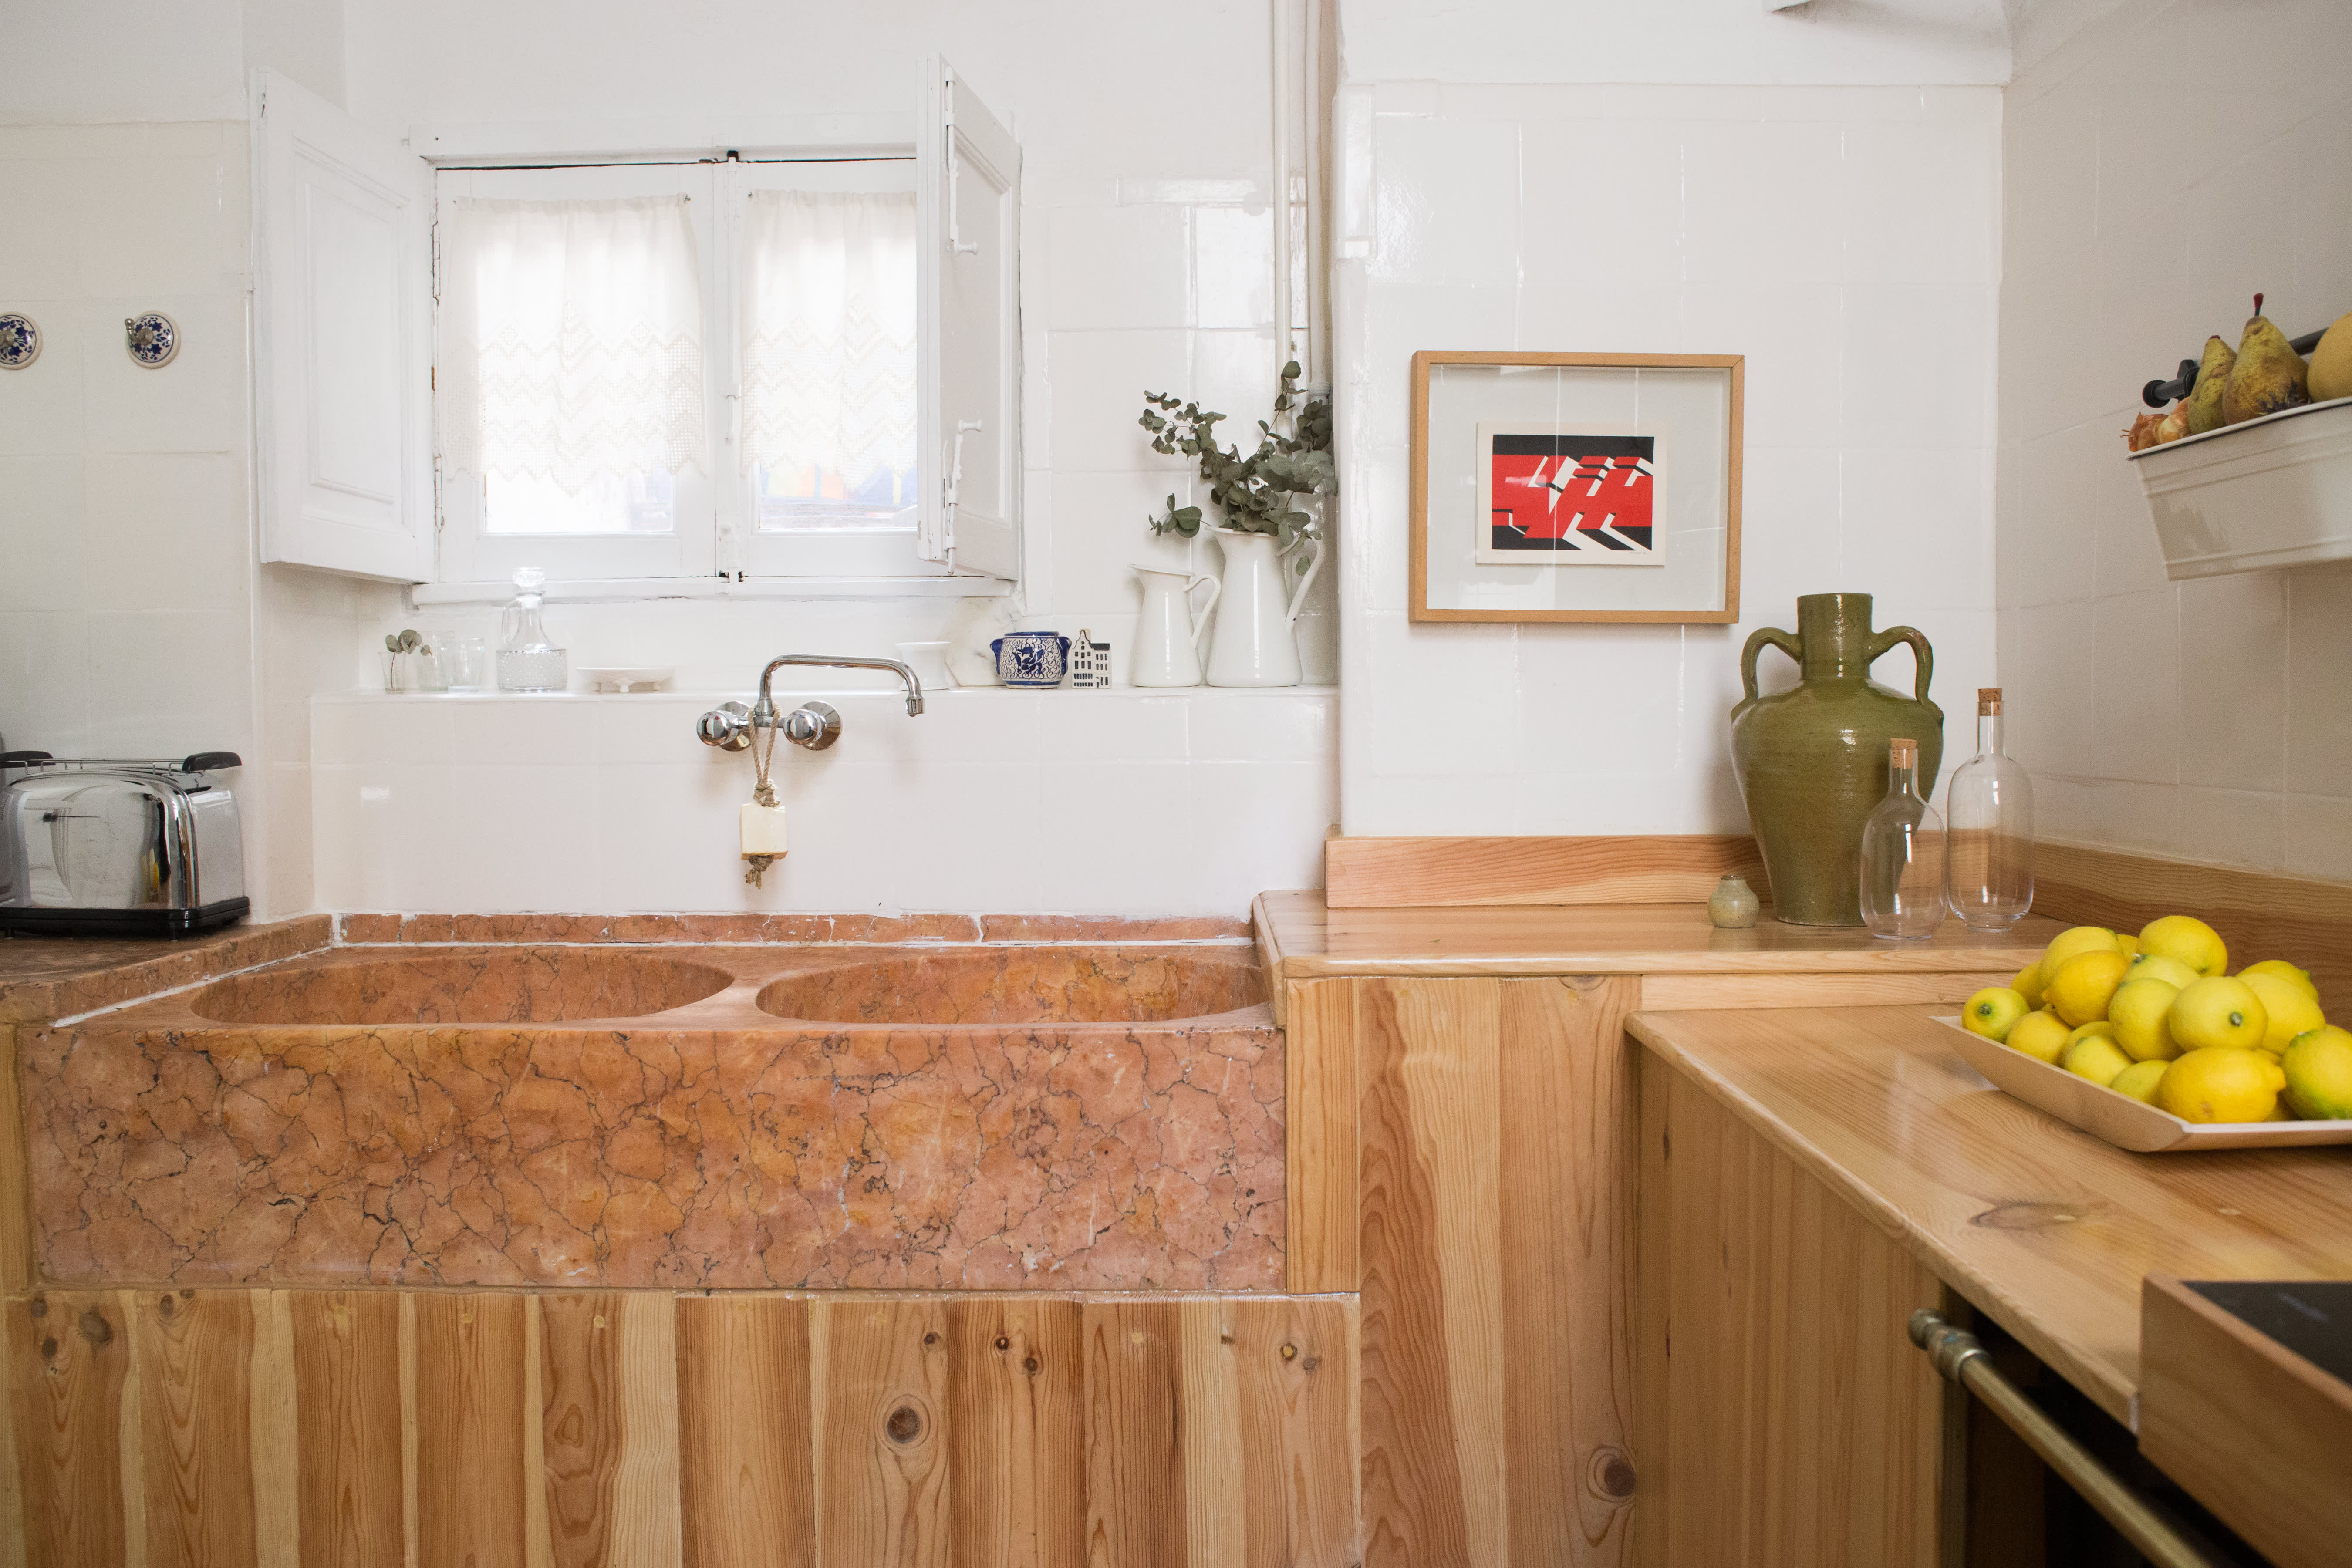 Sink Inspiration   Spanish Kitchen with Red Marble Sink   Kitchn